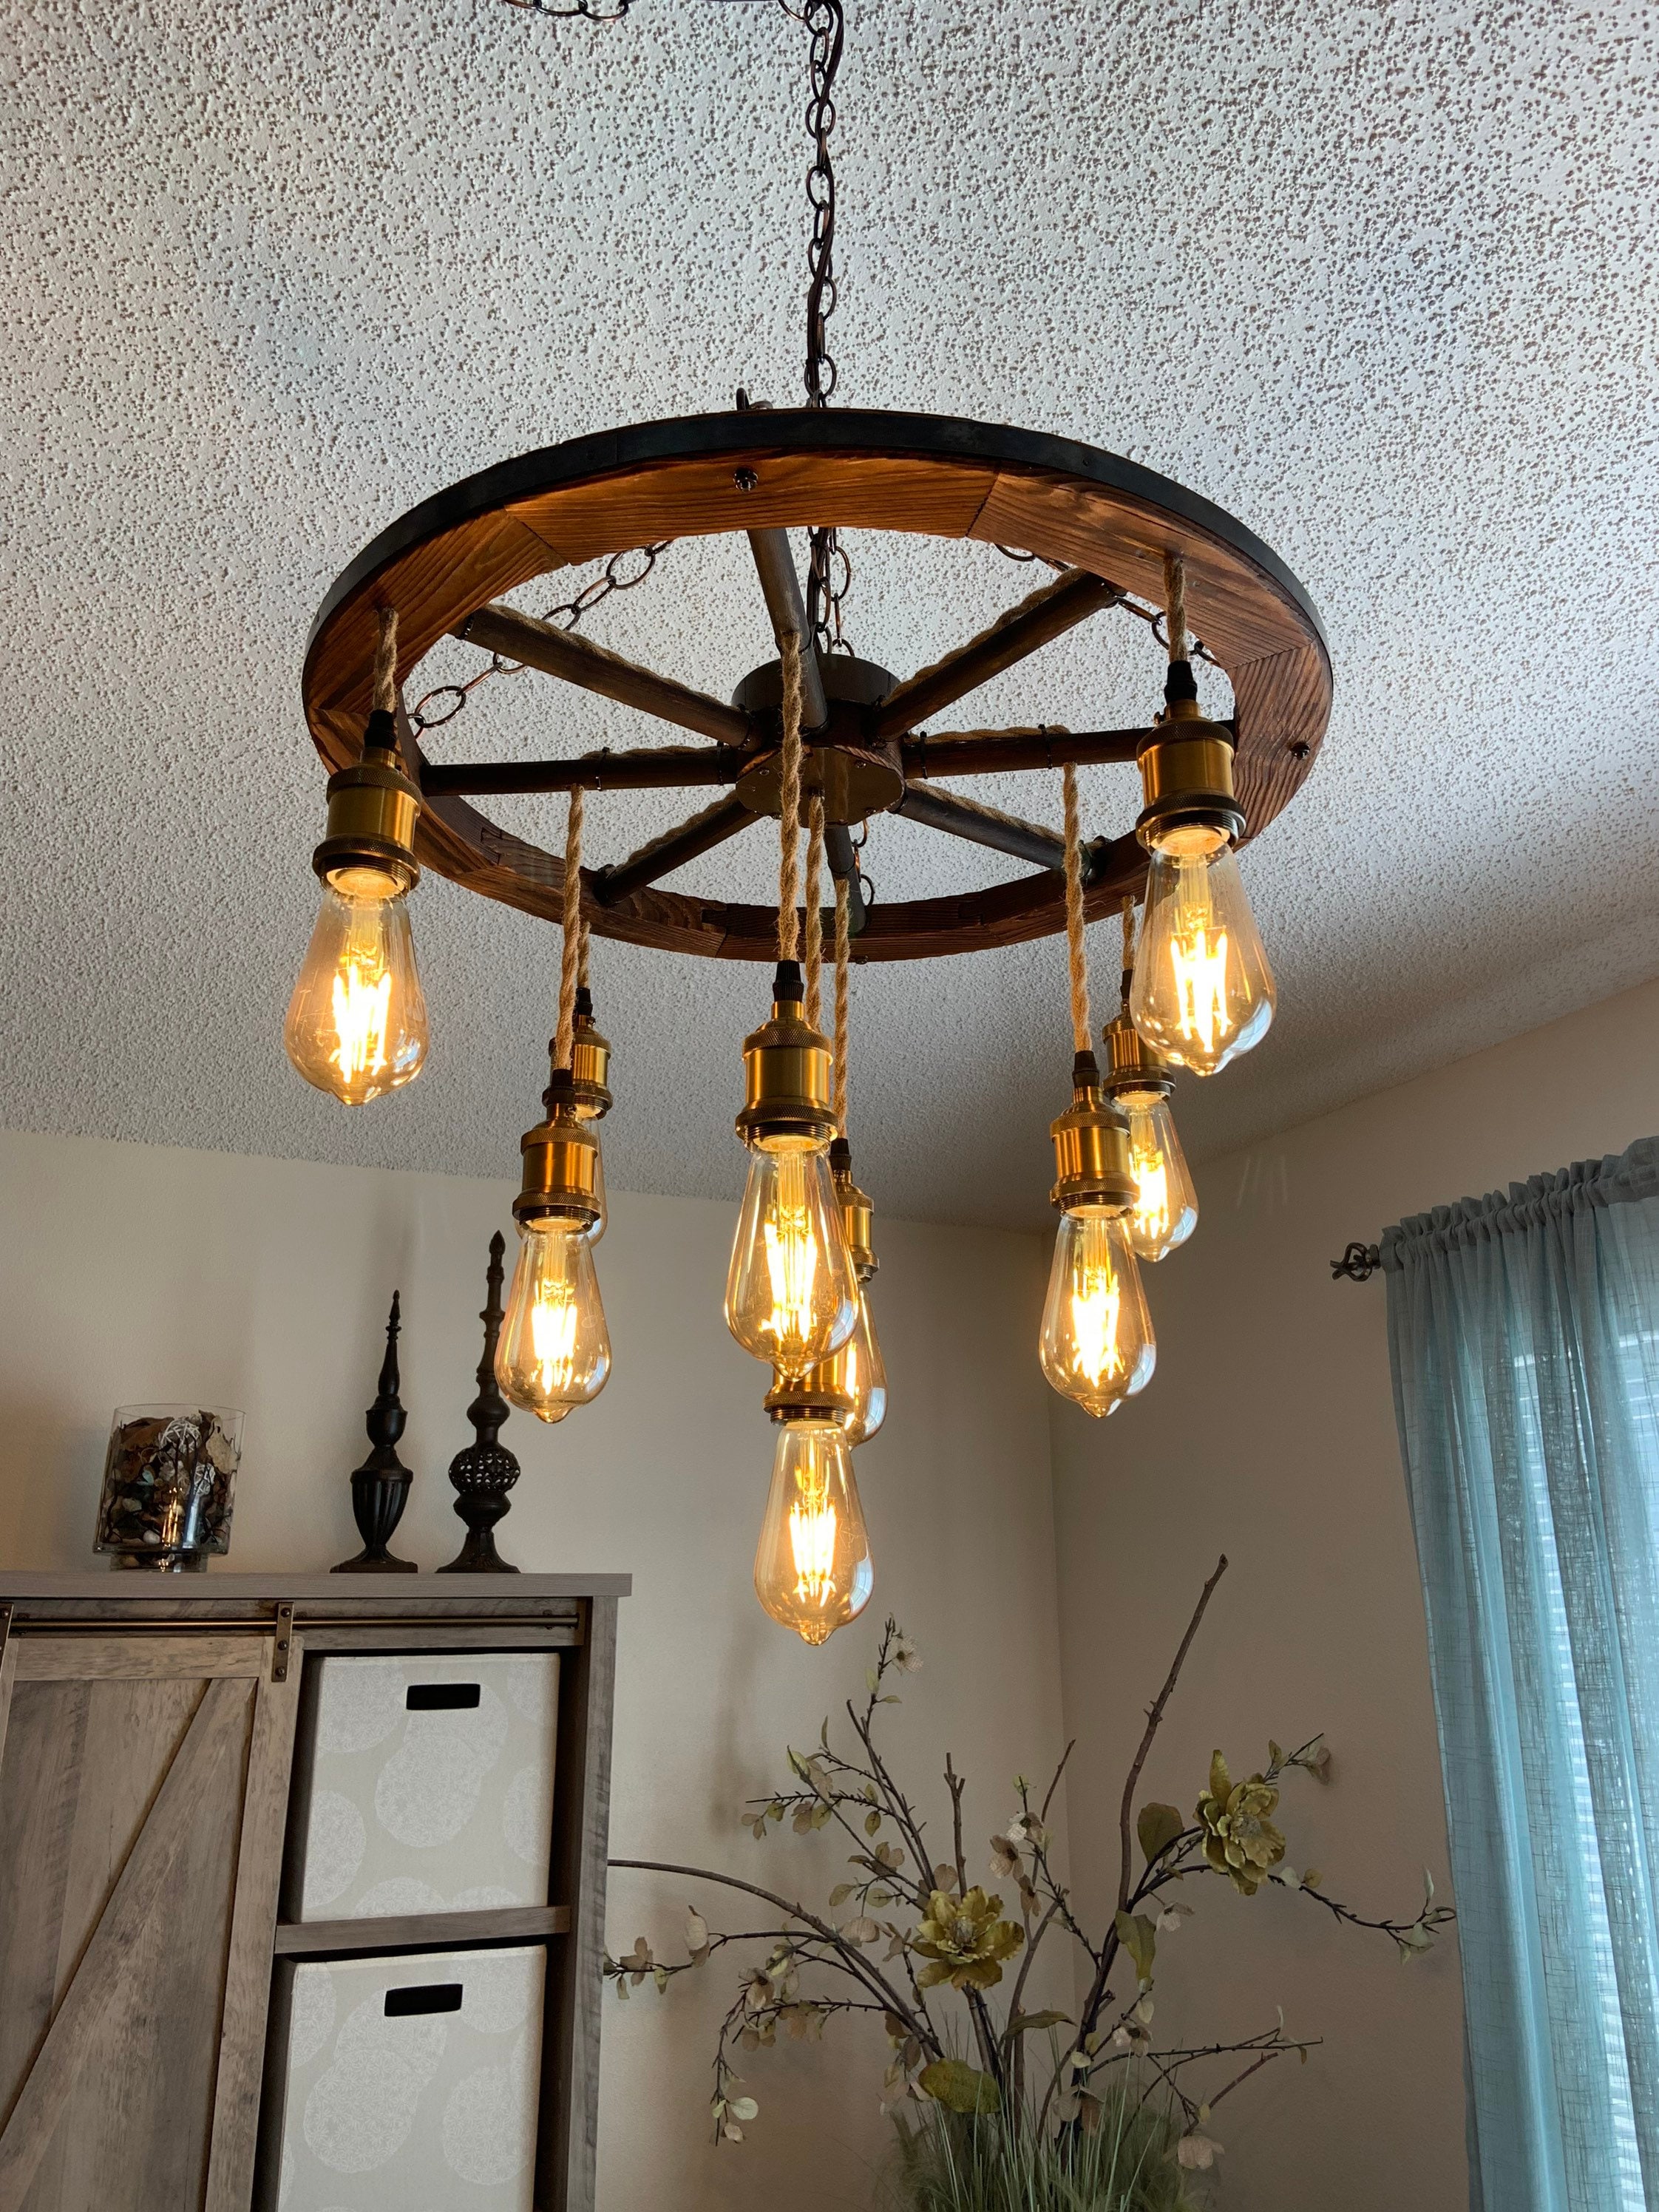 Wagon Wheel Chandelier with 3 tiers of Vintage Rope Lights